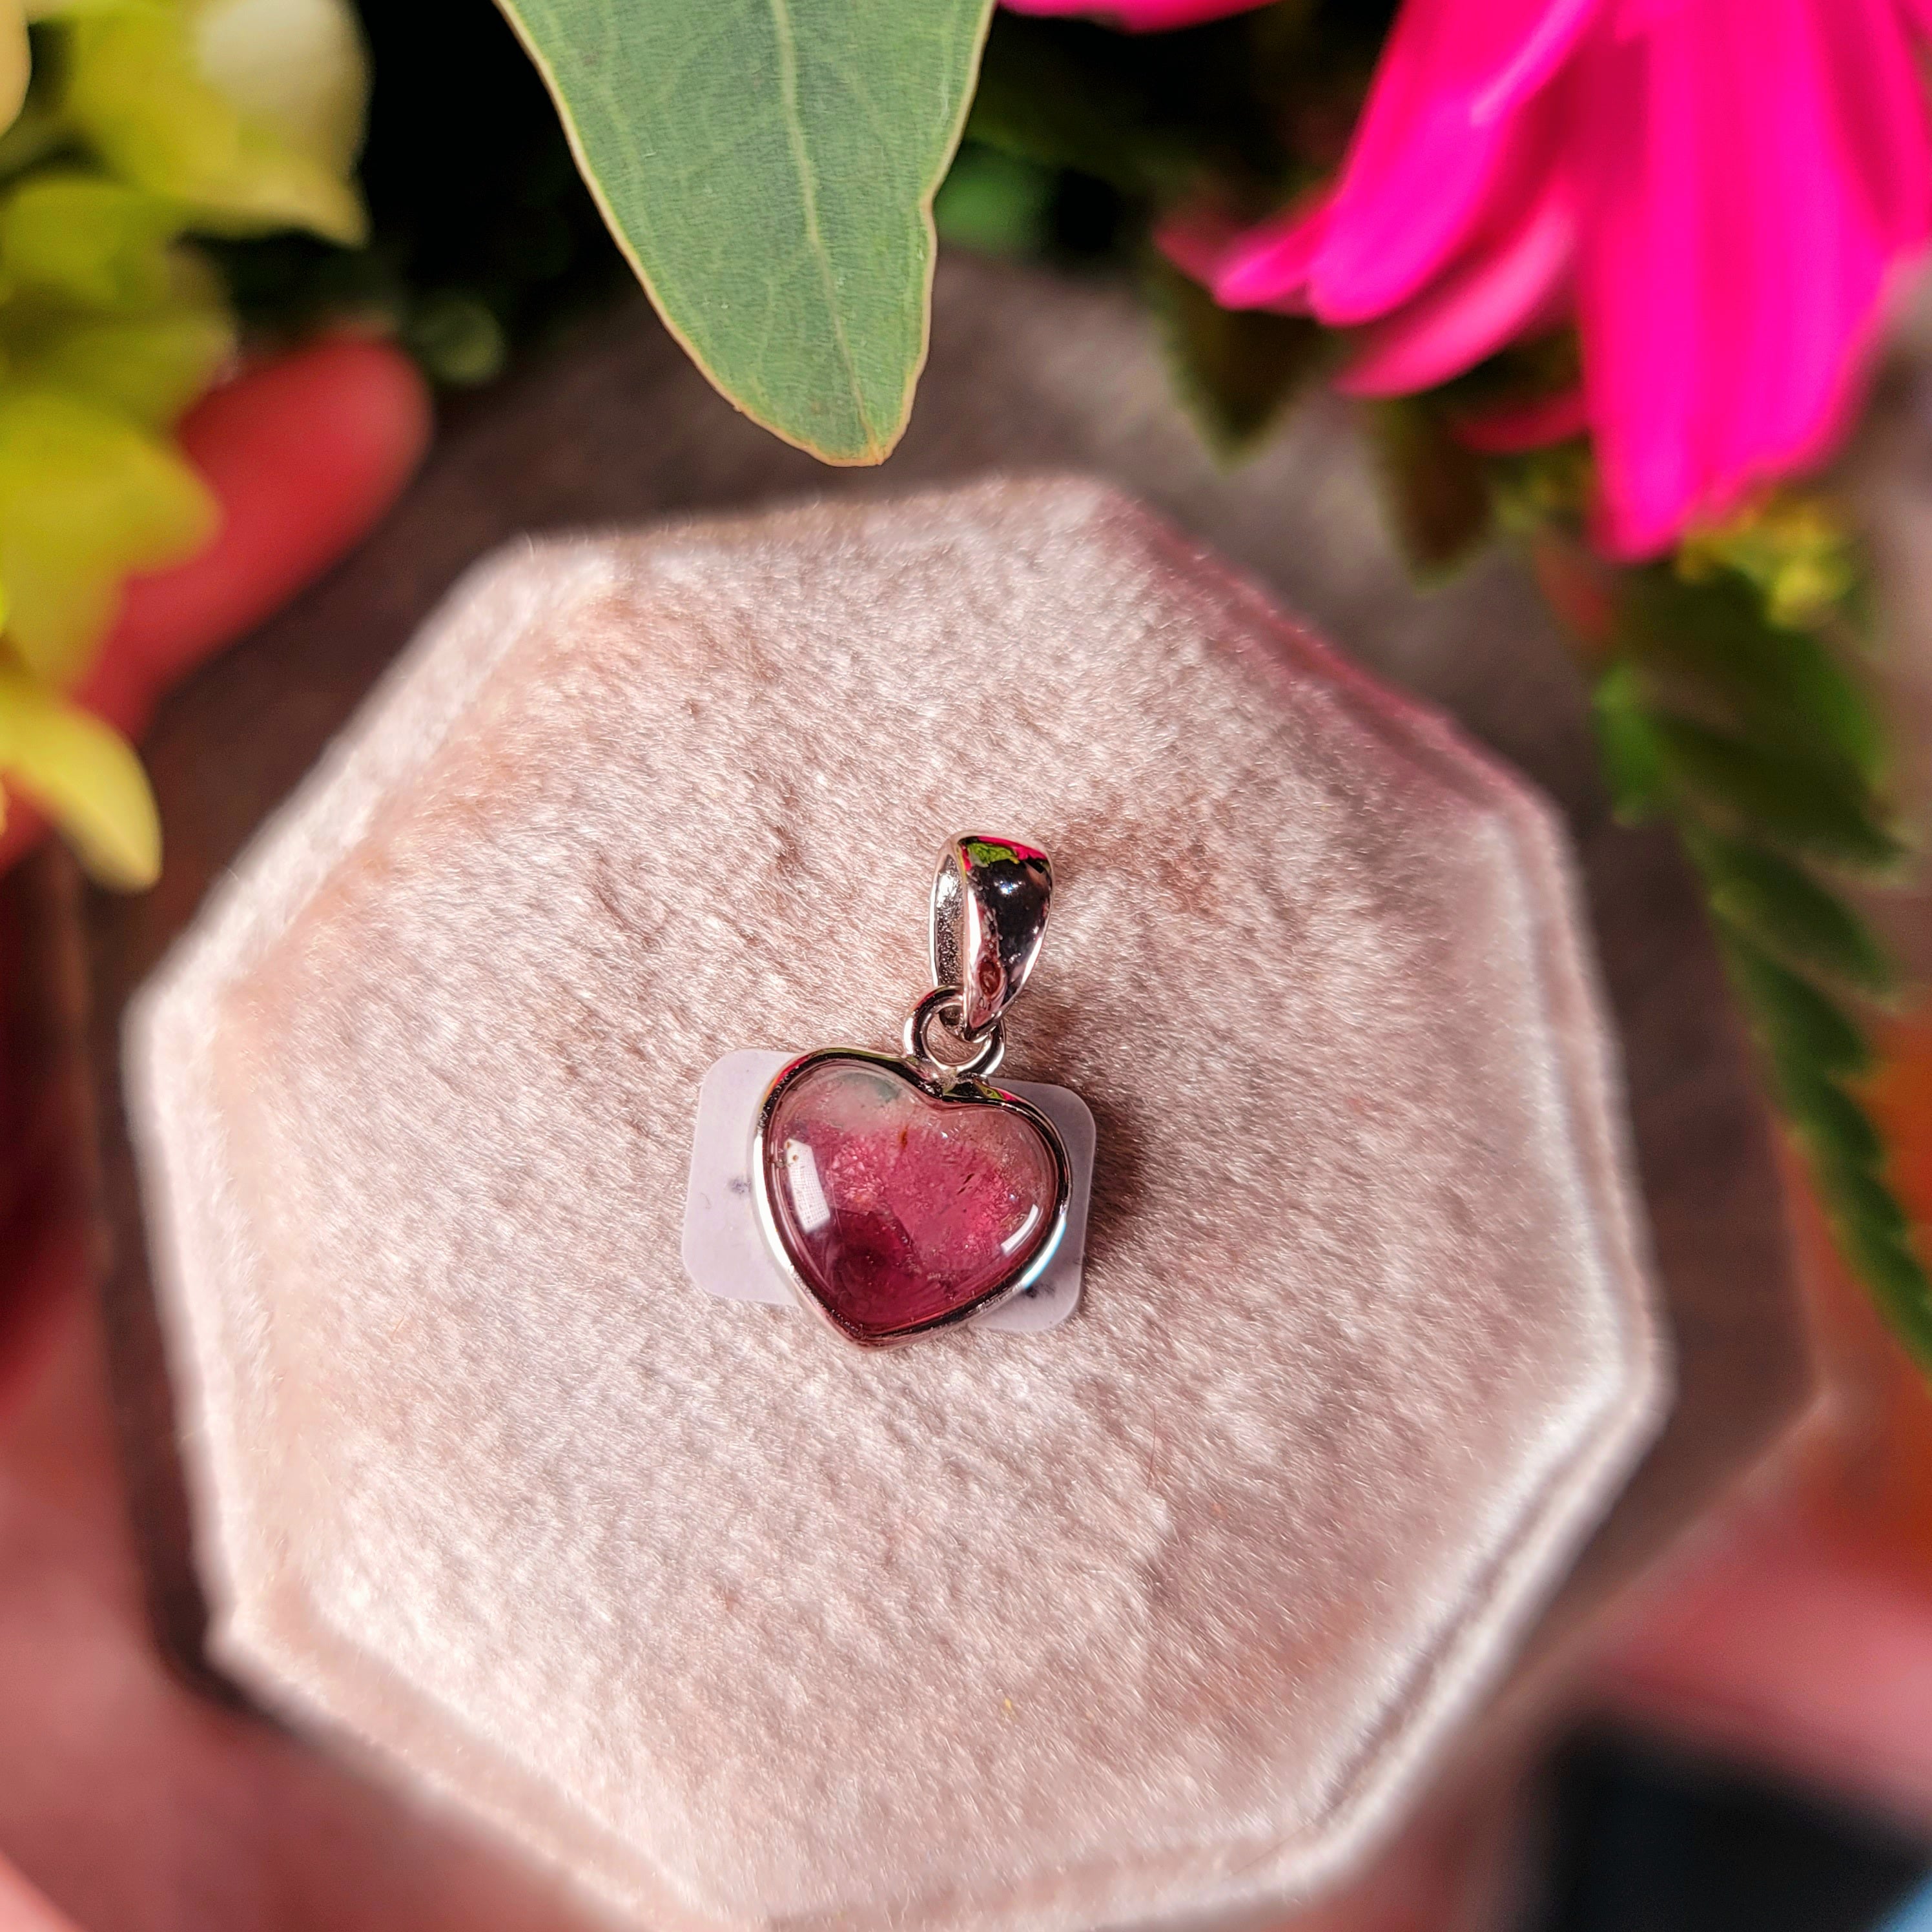 Watermelon Tourmaline Heart Pendant .925 Silver for Removing Insecurities and Helping Inspire Creativity